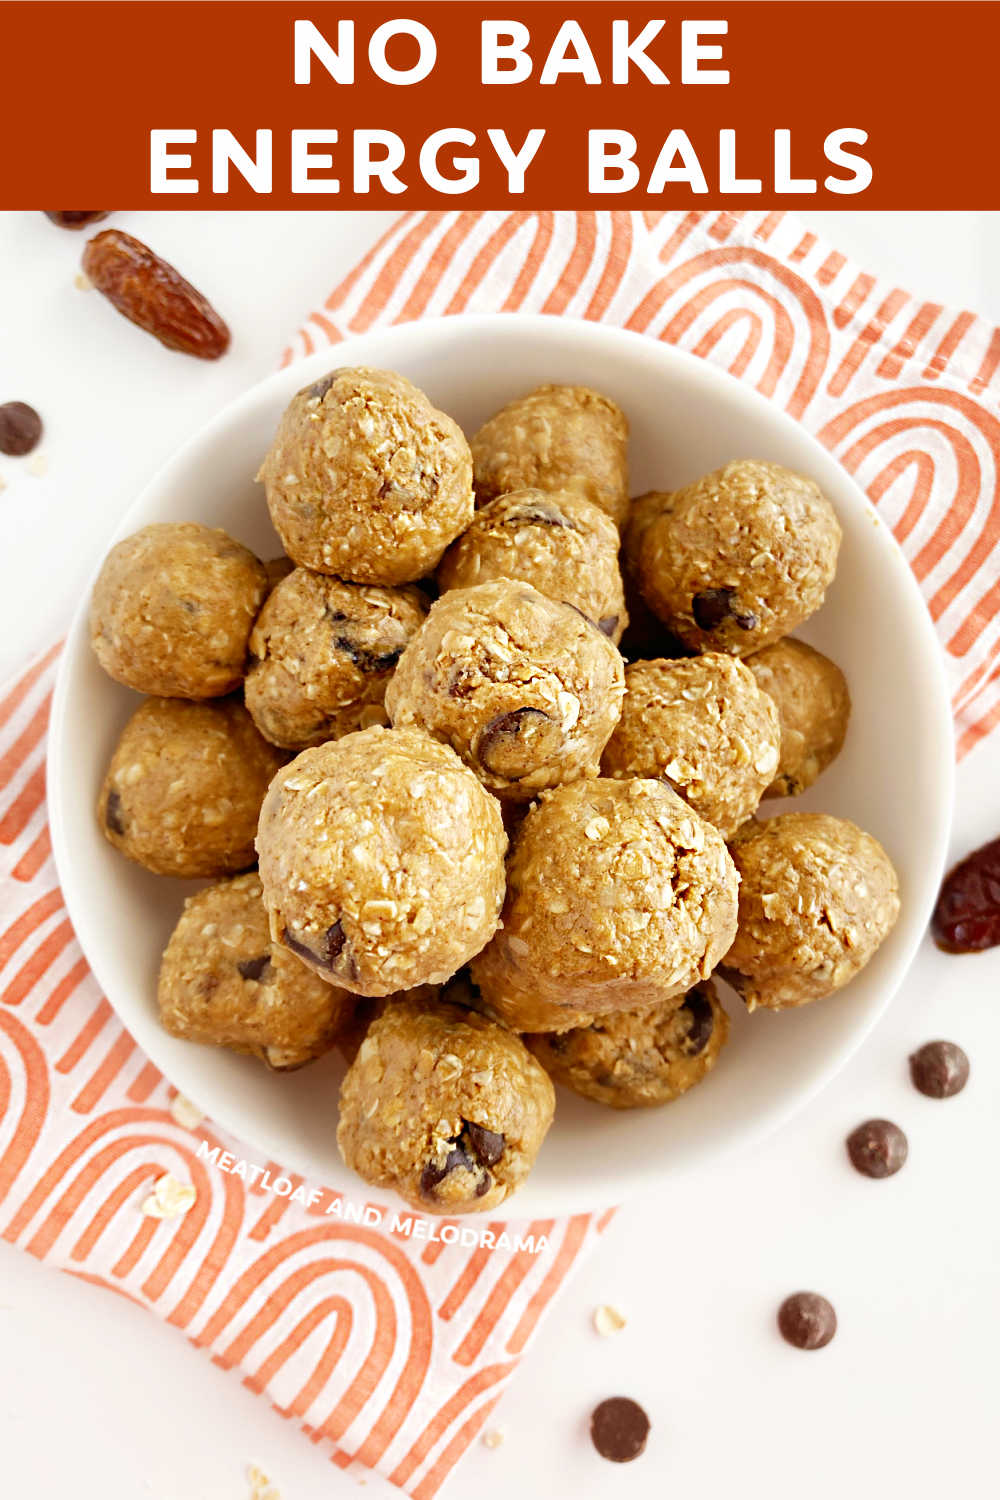 This easy No Bake Energy Balls Recipe with rolled oats, peanut butter and dates makes a delicious healthy treat to satisfy your sweet tooth. Energy bites are the perfect snack for after school or whenever you need a quick pick-me-up! via @meamel